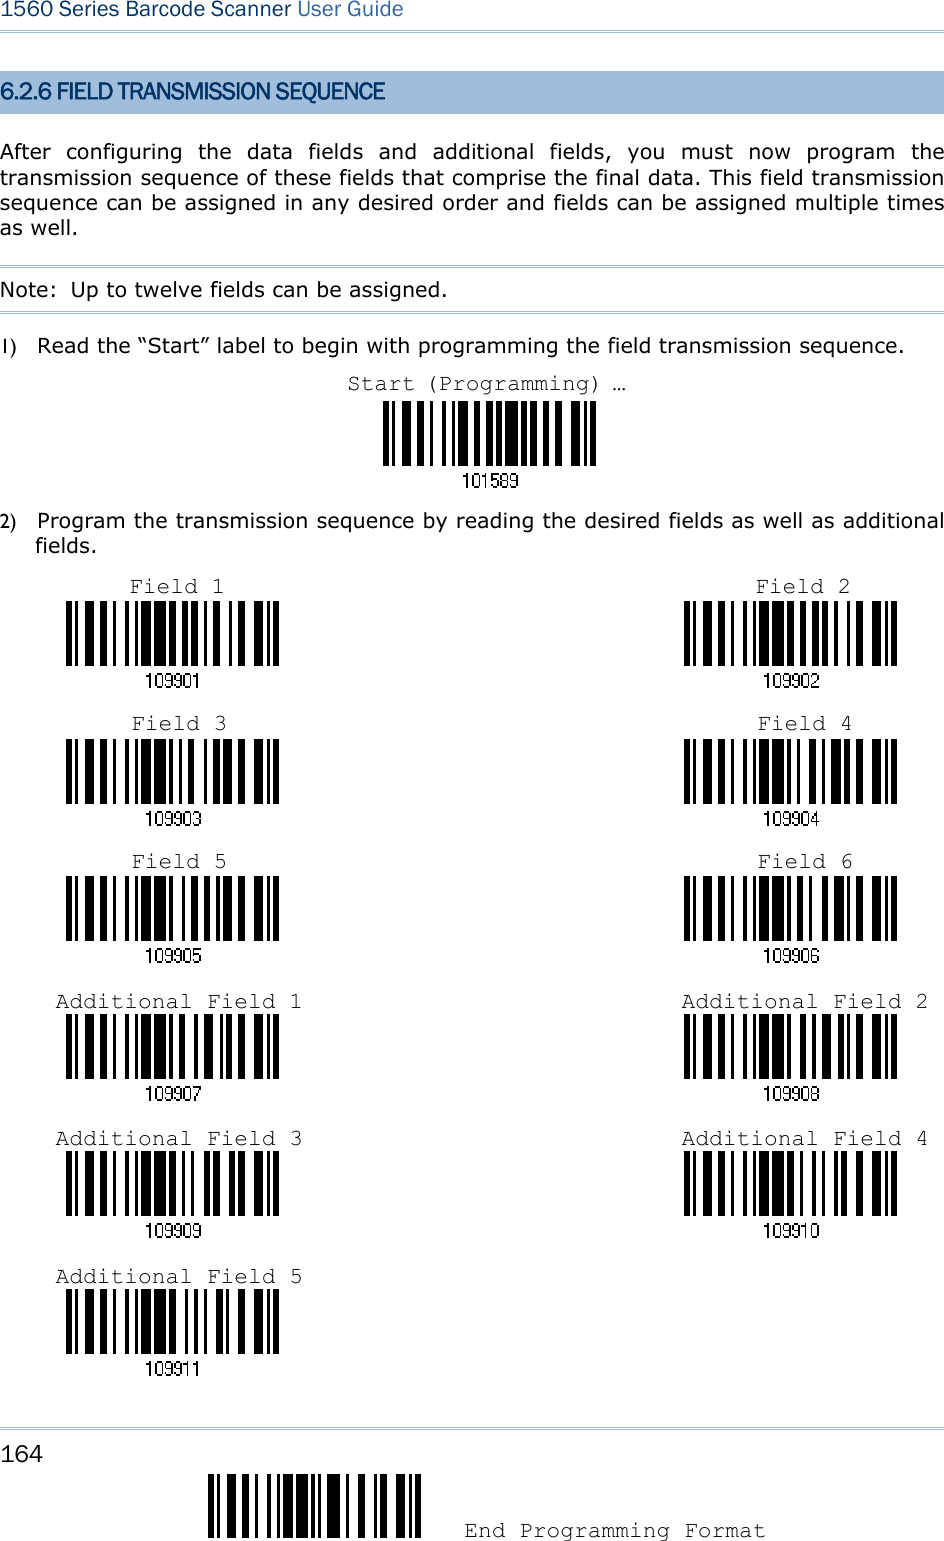 164  End Programming Format 1560 Series Barcode Scanner User Guide  6.2.6 FIELD TRANSMISSION SEQUENCE After configuring the data fields and additional fields, you must now program the transmission sequence of these fields that comprise the final data. This field transmission sequence can be assigned in any desired order and fields can be assigned multiple times as well.   Note:  Up to twelve fields can be assigned. 1) Read the “Start” label to begin with programming the field transmission sequence.  2) Program the transmission sequence by reading the desired fields as well as additional fields.                                                                                                                                                                                                                       Start (Programming) …Field 1 Field 2 Field 3 Field 4 Field 5 Field 6 Additional Field 1 Additional Field 2Additional Field 3 Additional Field 4Additional Field 5 